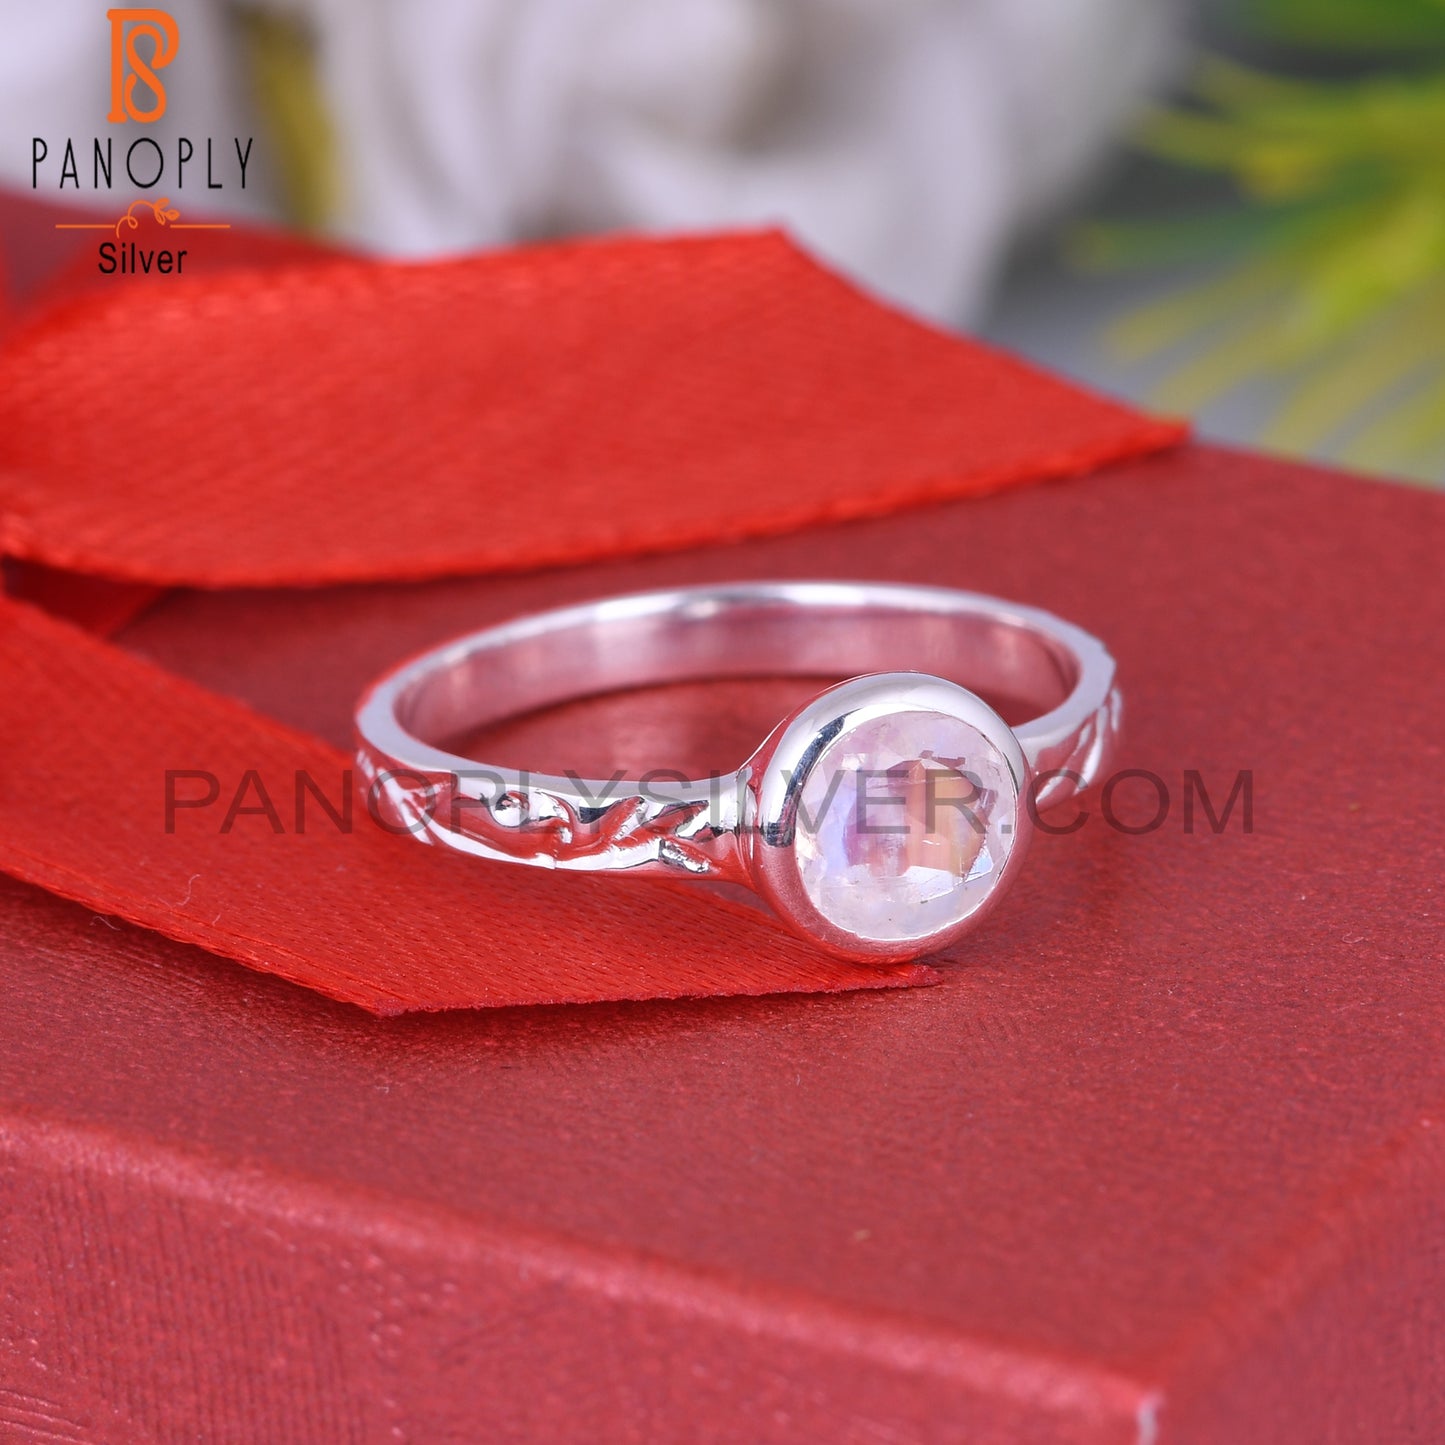 Rainbow Moonstone 925 Sterling Silver Ring For Women